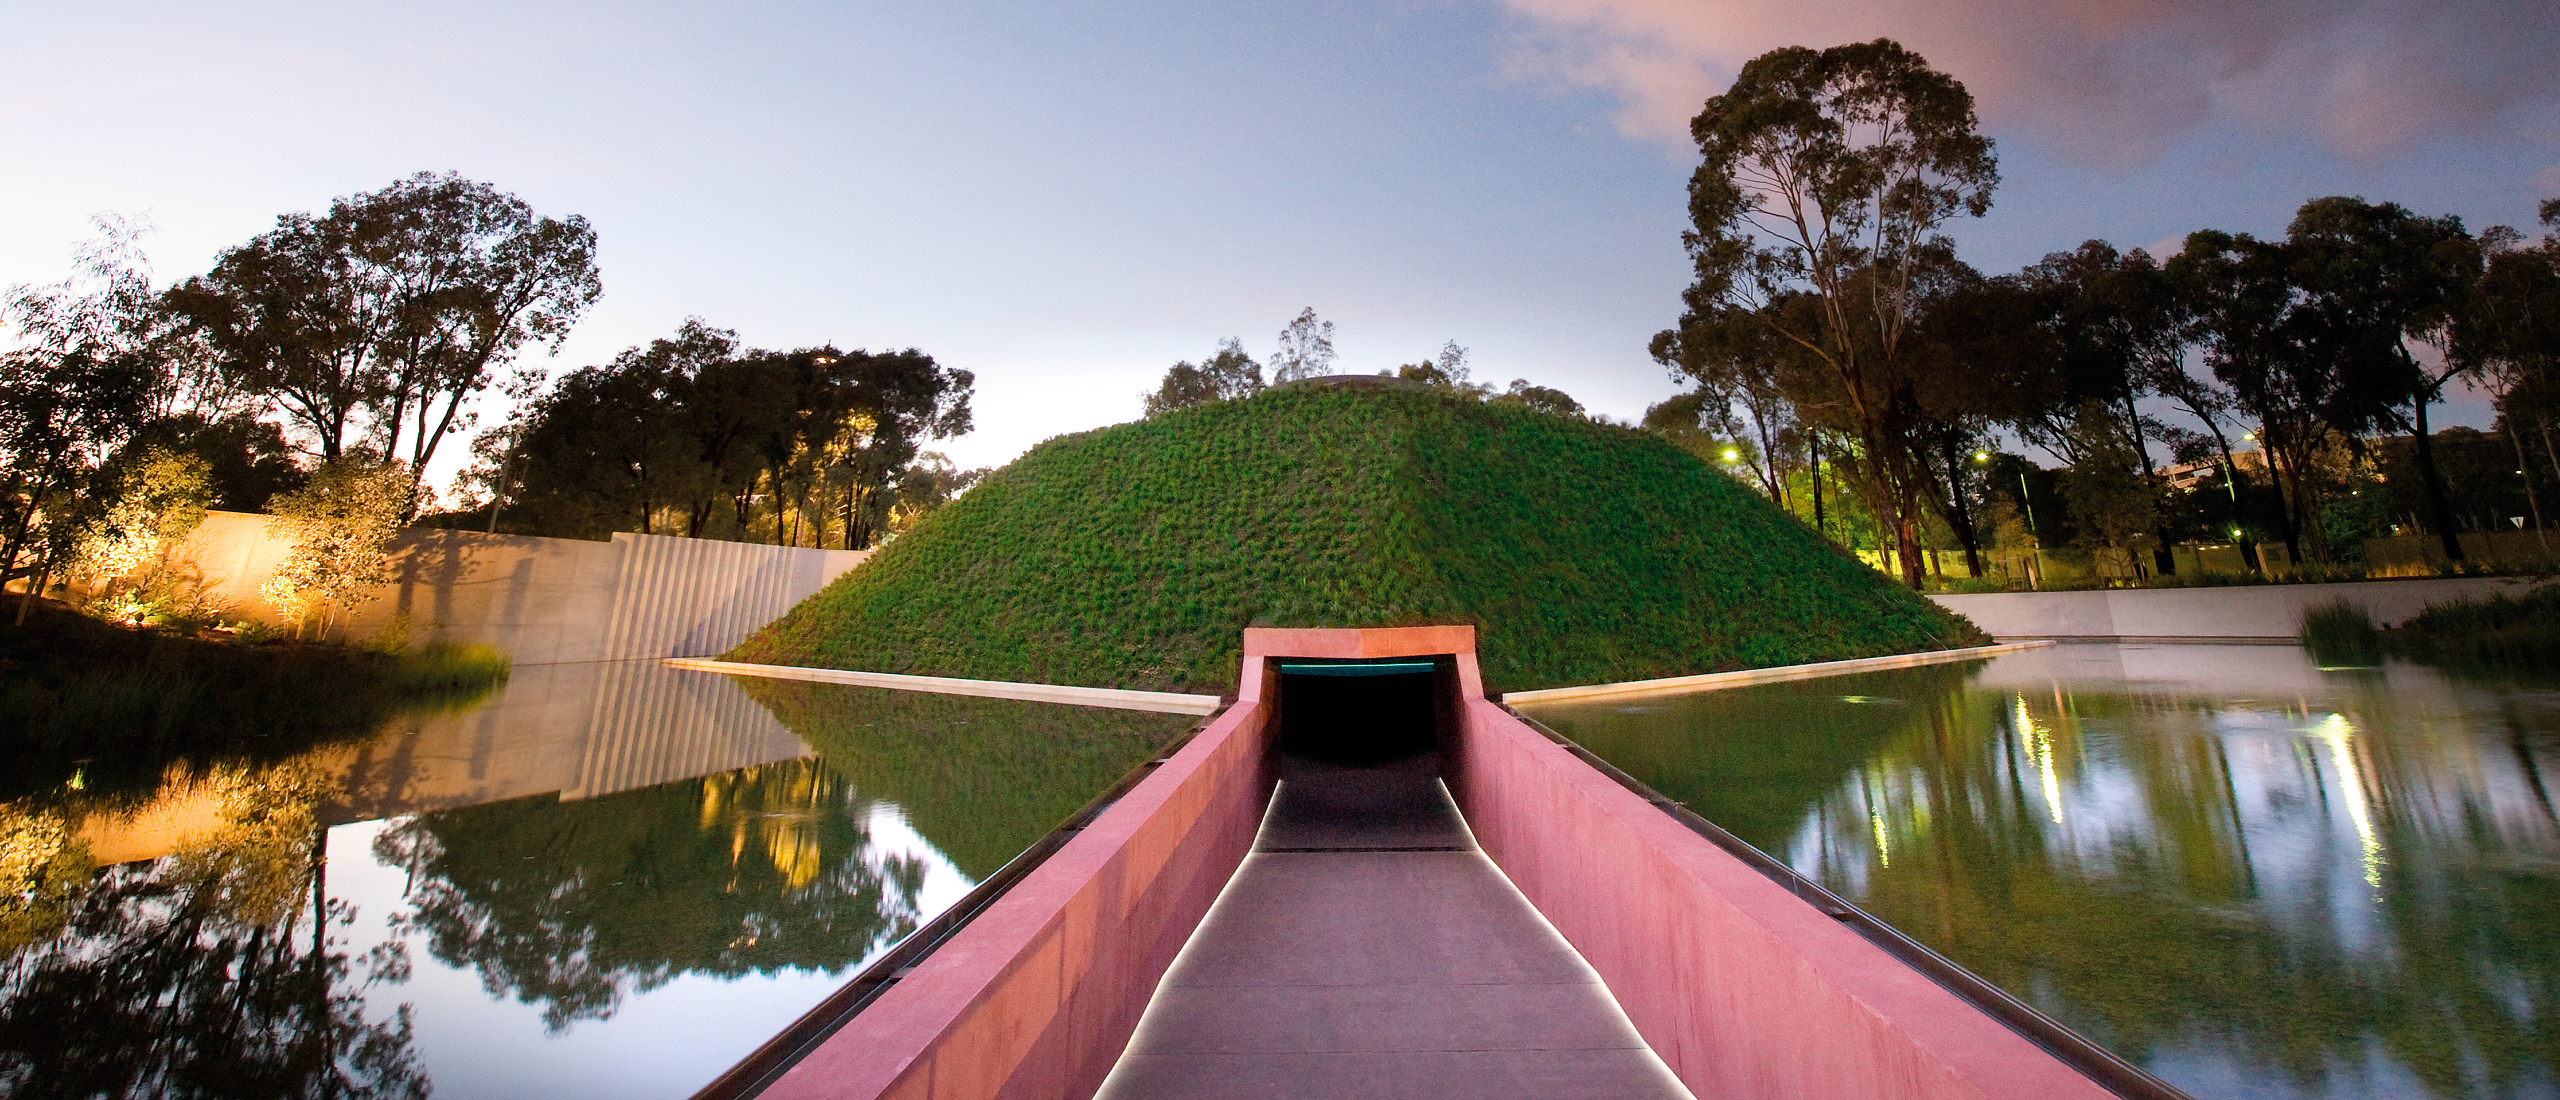 McGregor Coxall. Artwork von James Turrell „Within Without“. Foto: John Gollings